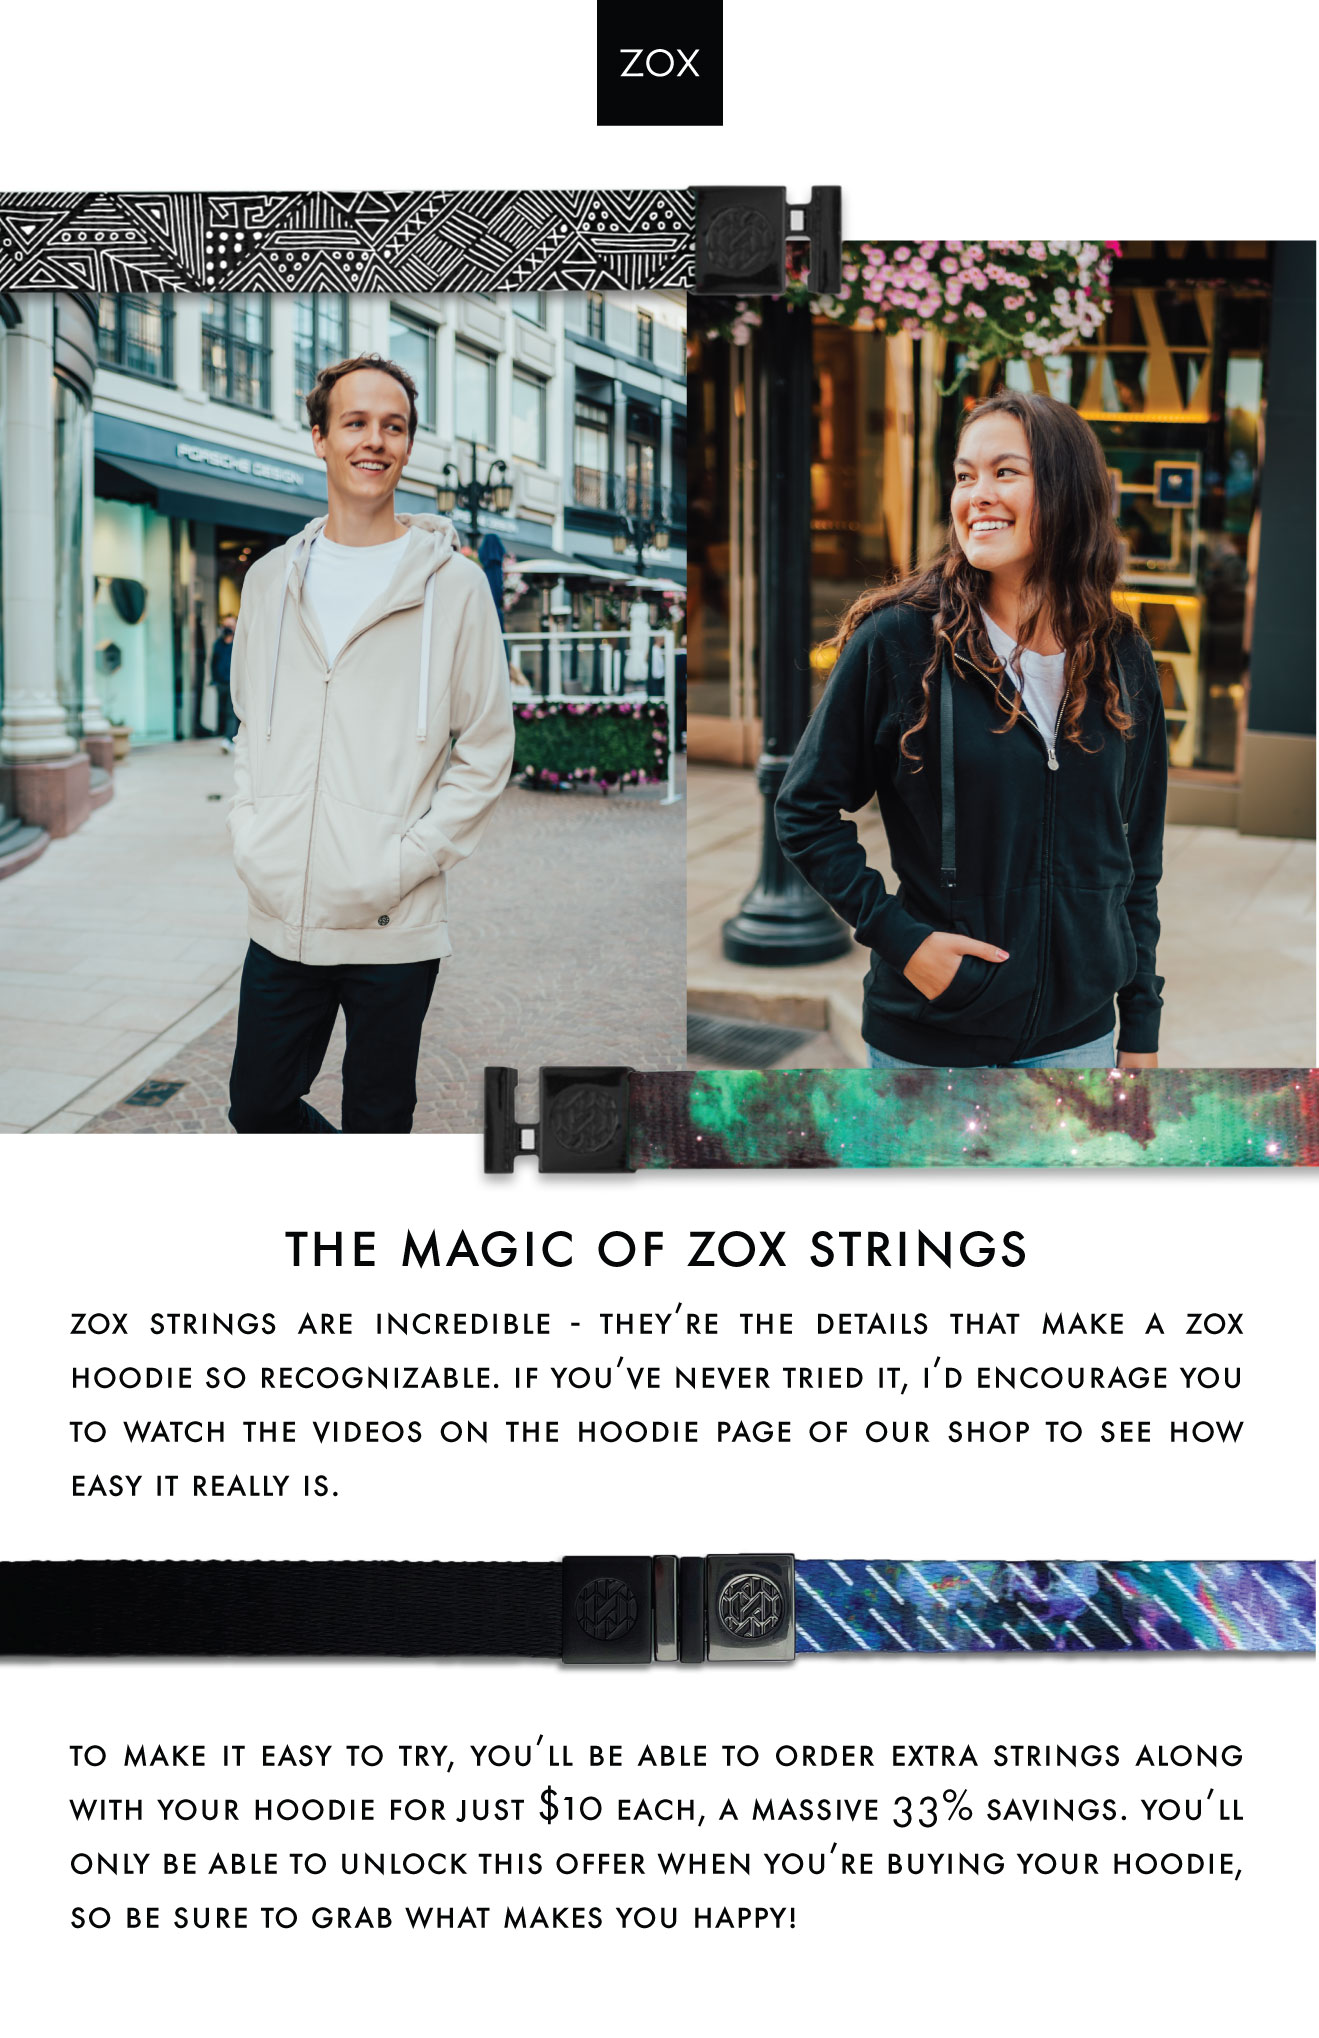 ZOX Strings are the details that make a ZOX Hoodies so recognizable.